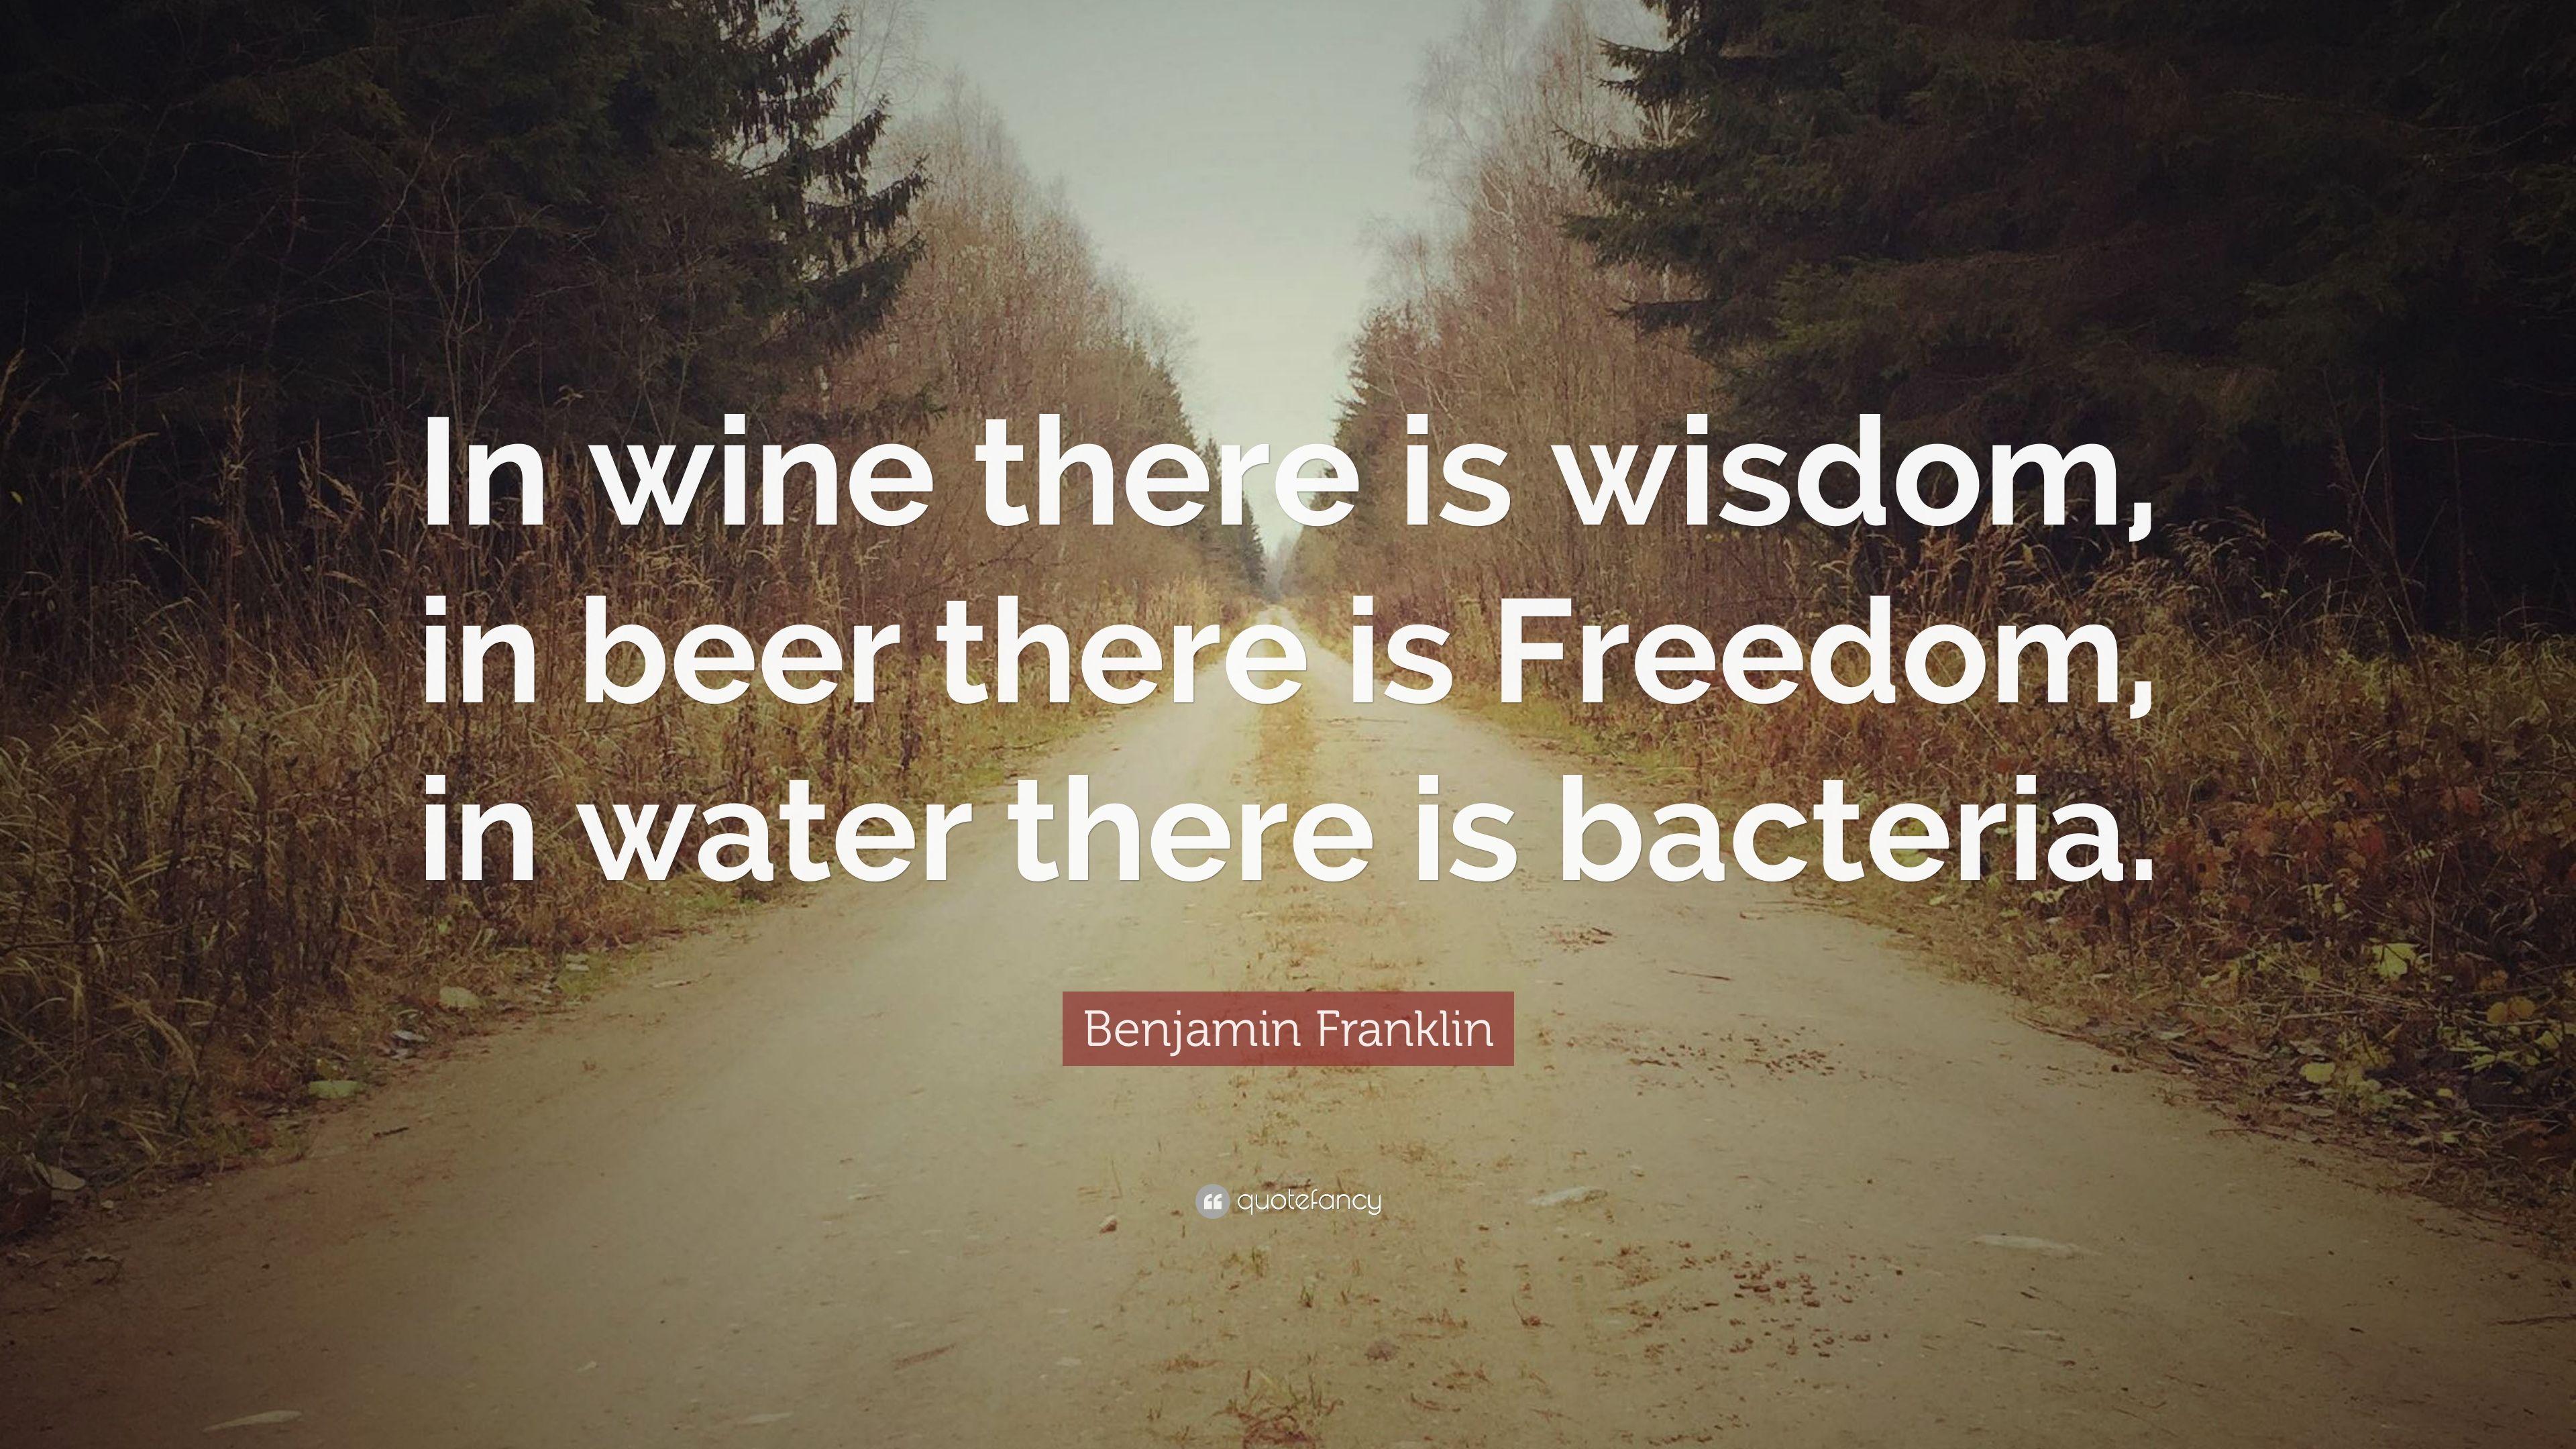 Benjamin Franklin Quote: “In wine there is wisdom, in beer there